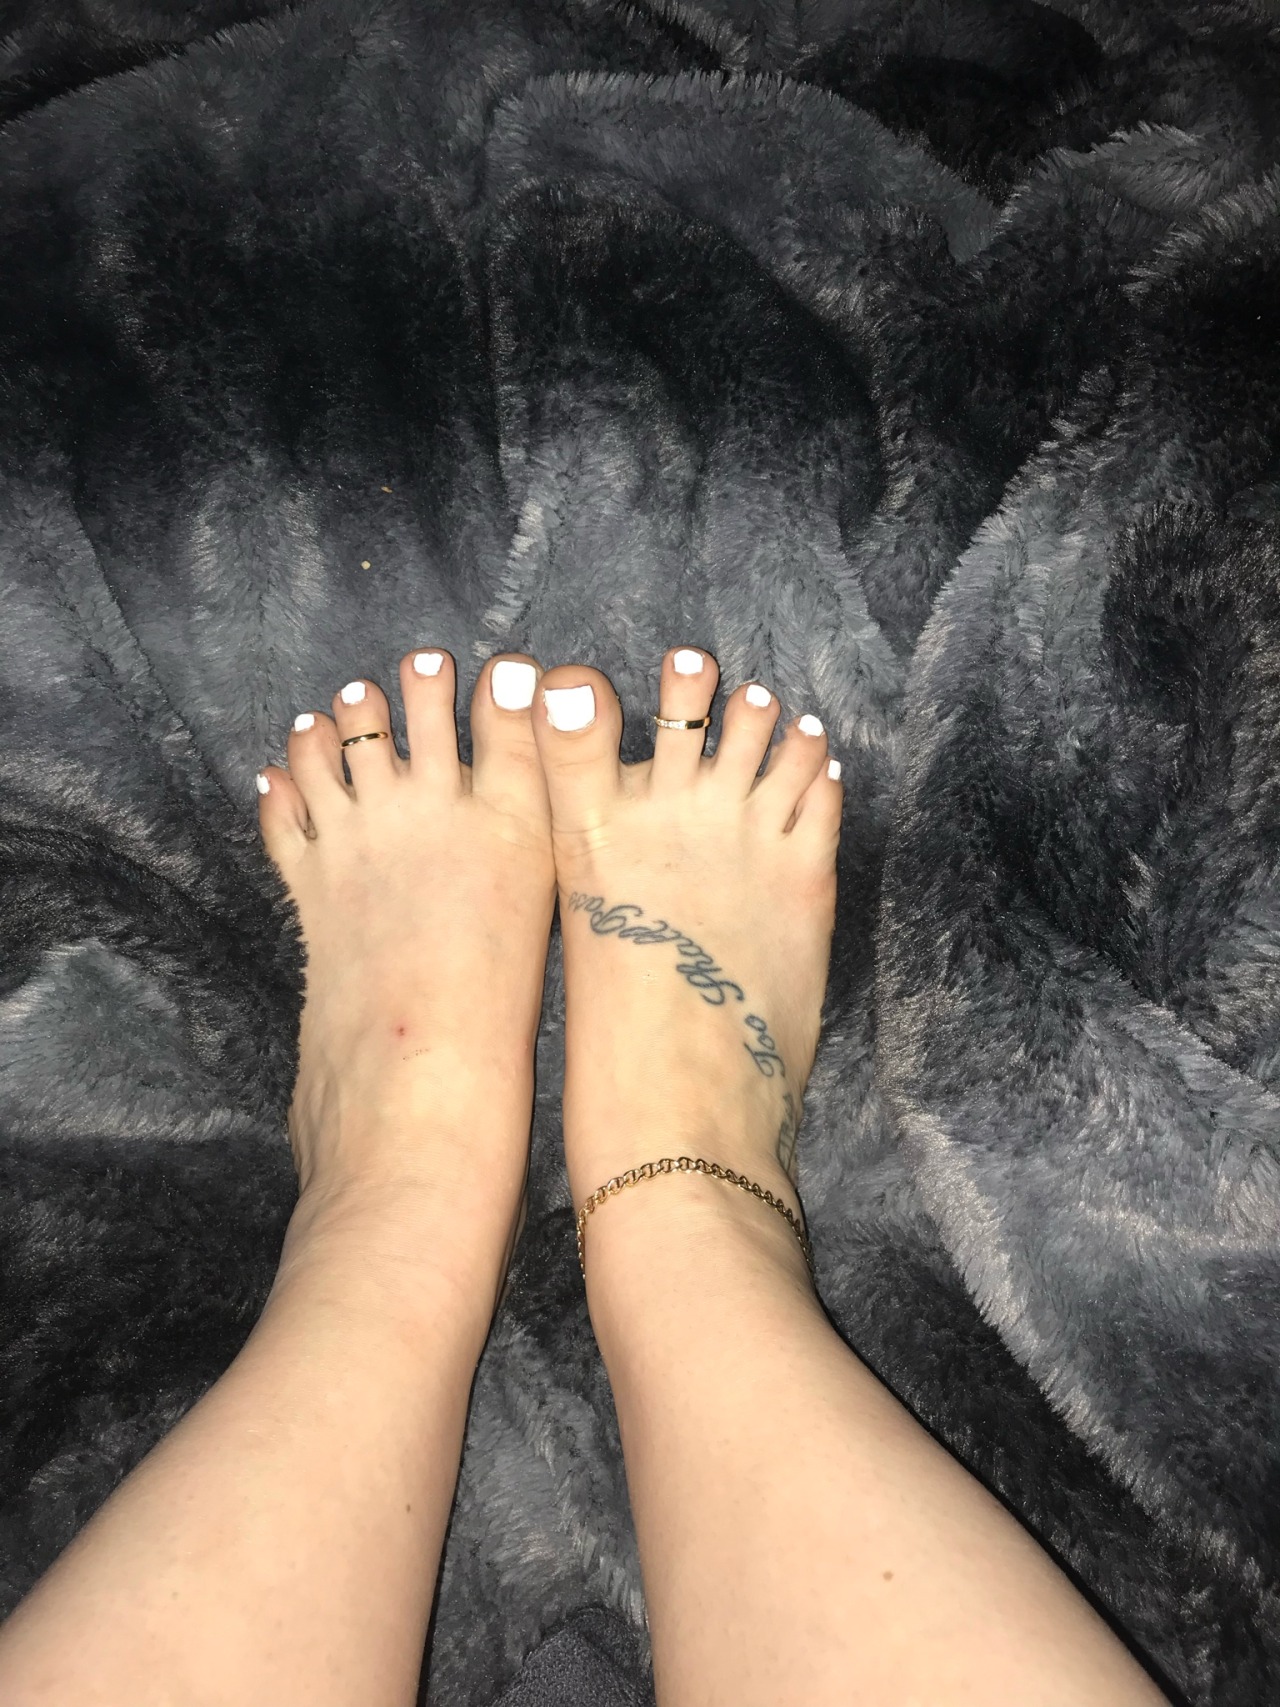 Sexy Feet Missing Summer Covering Up